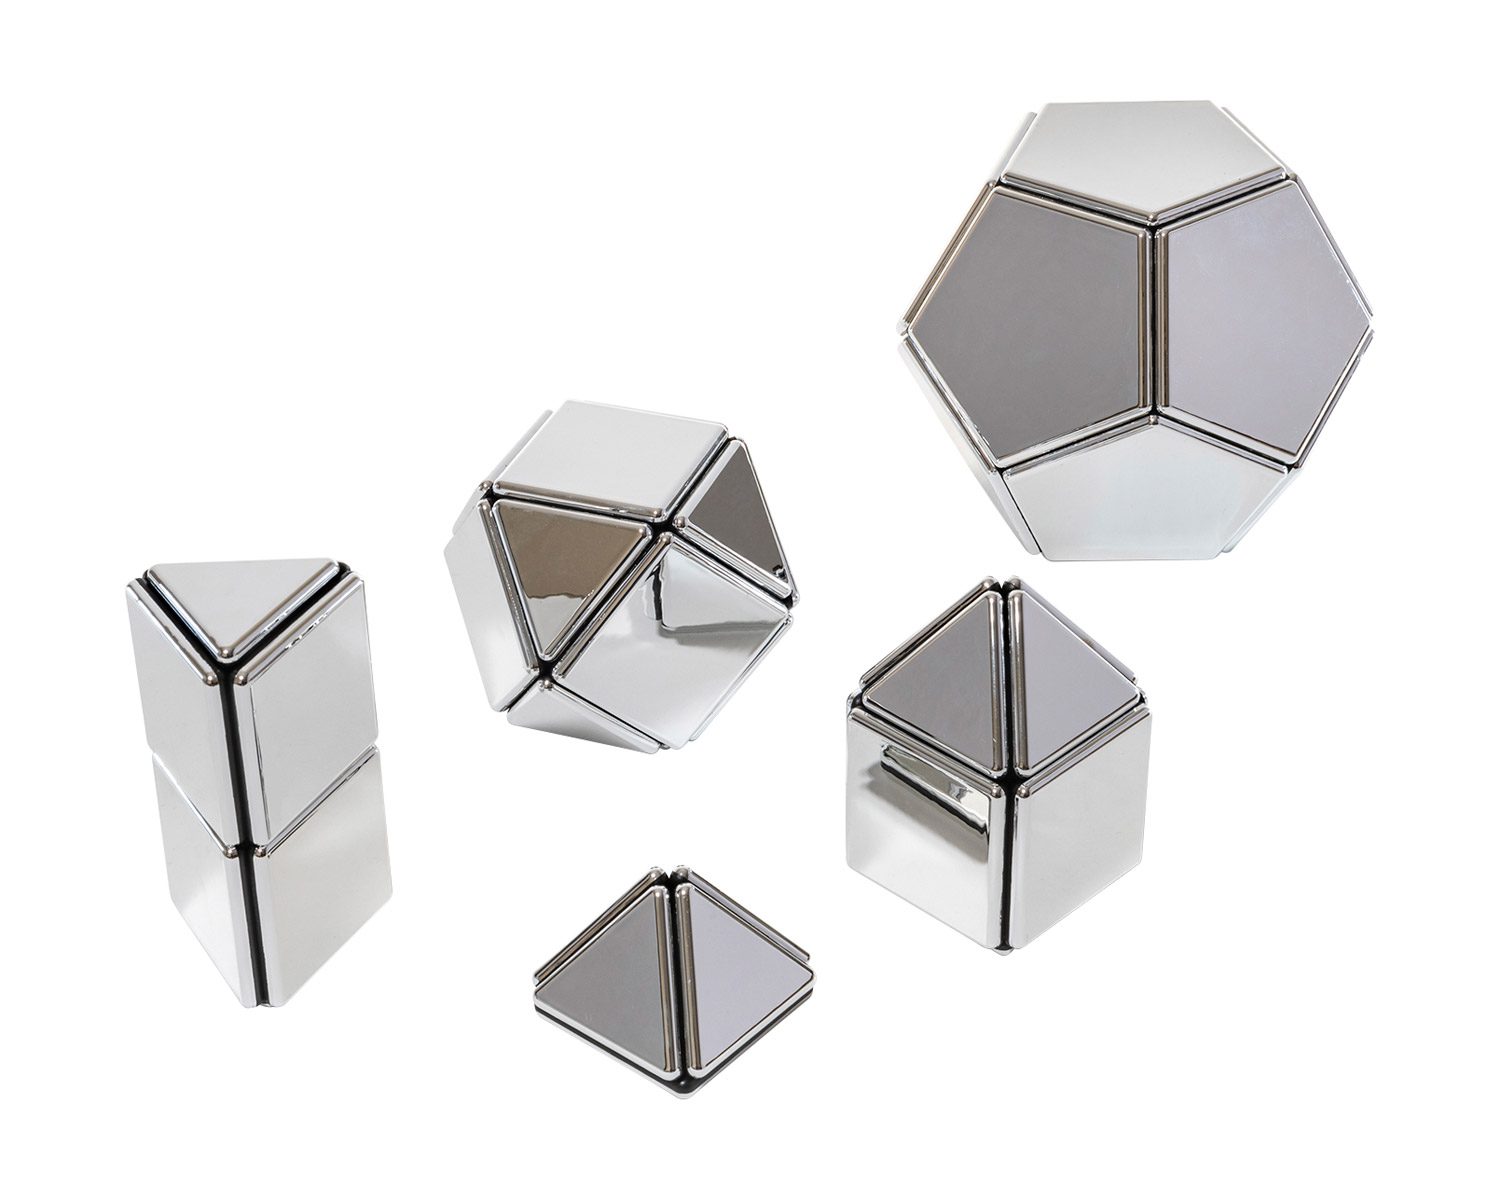 Polydron magnetic mirror